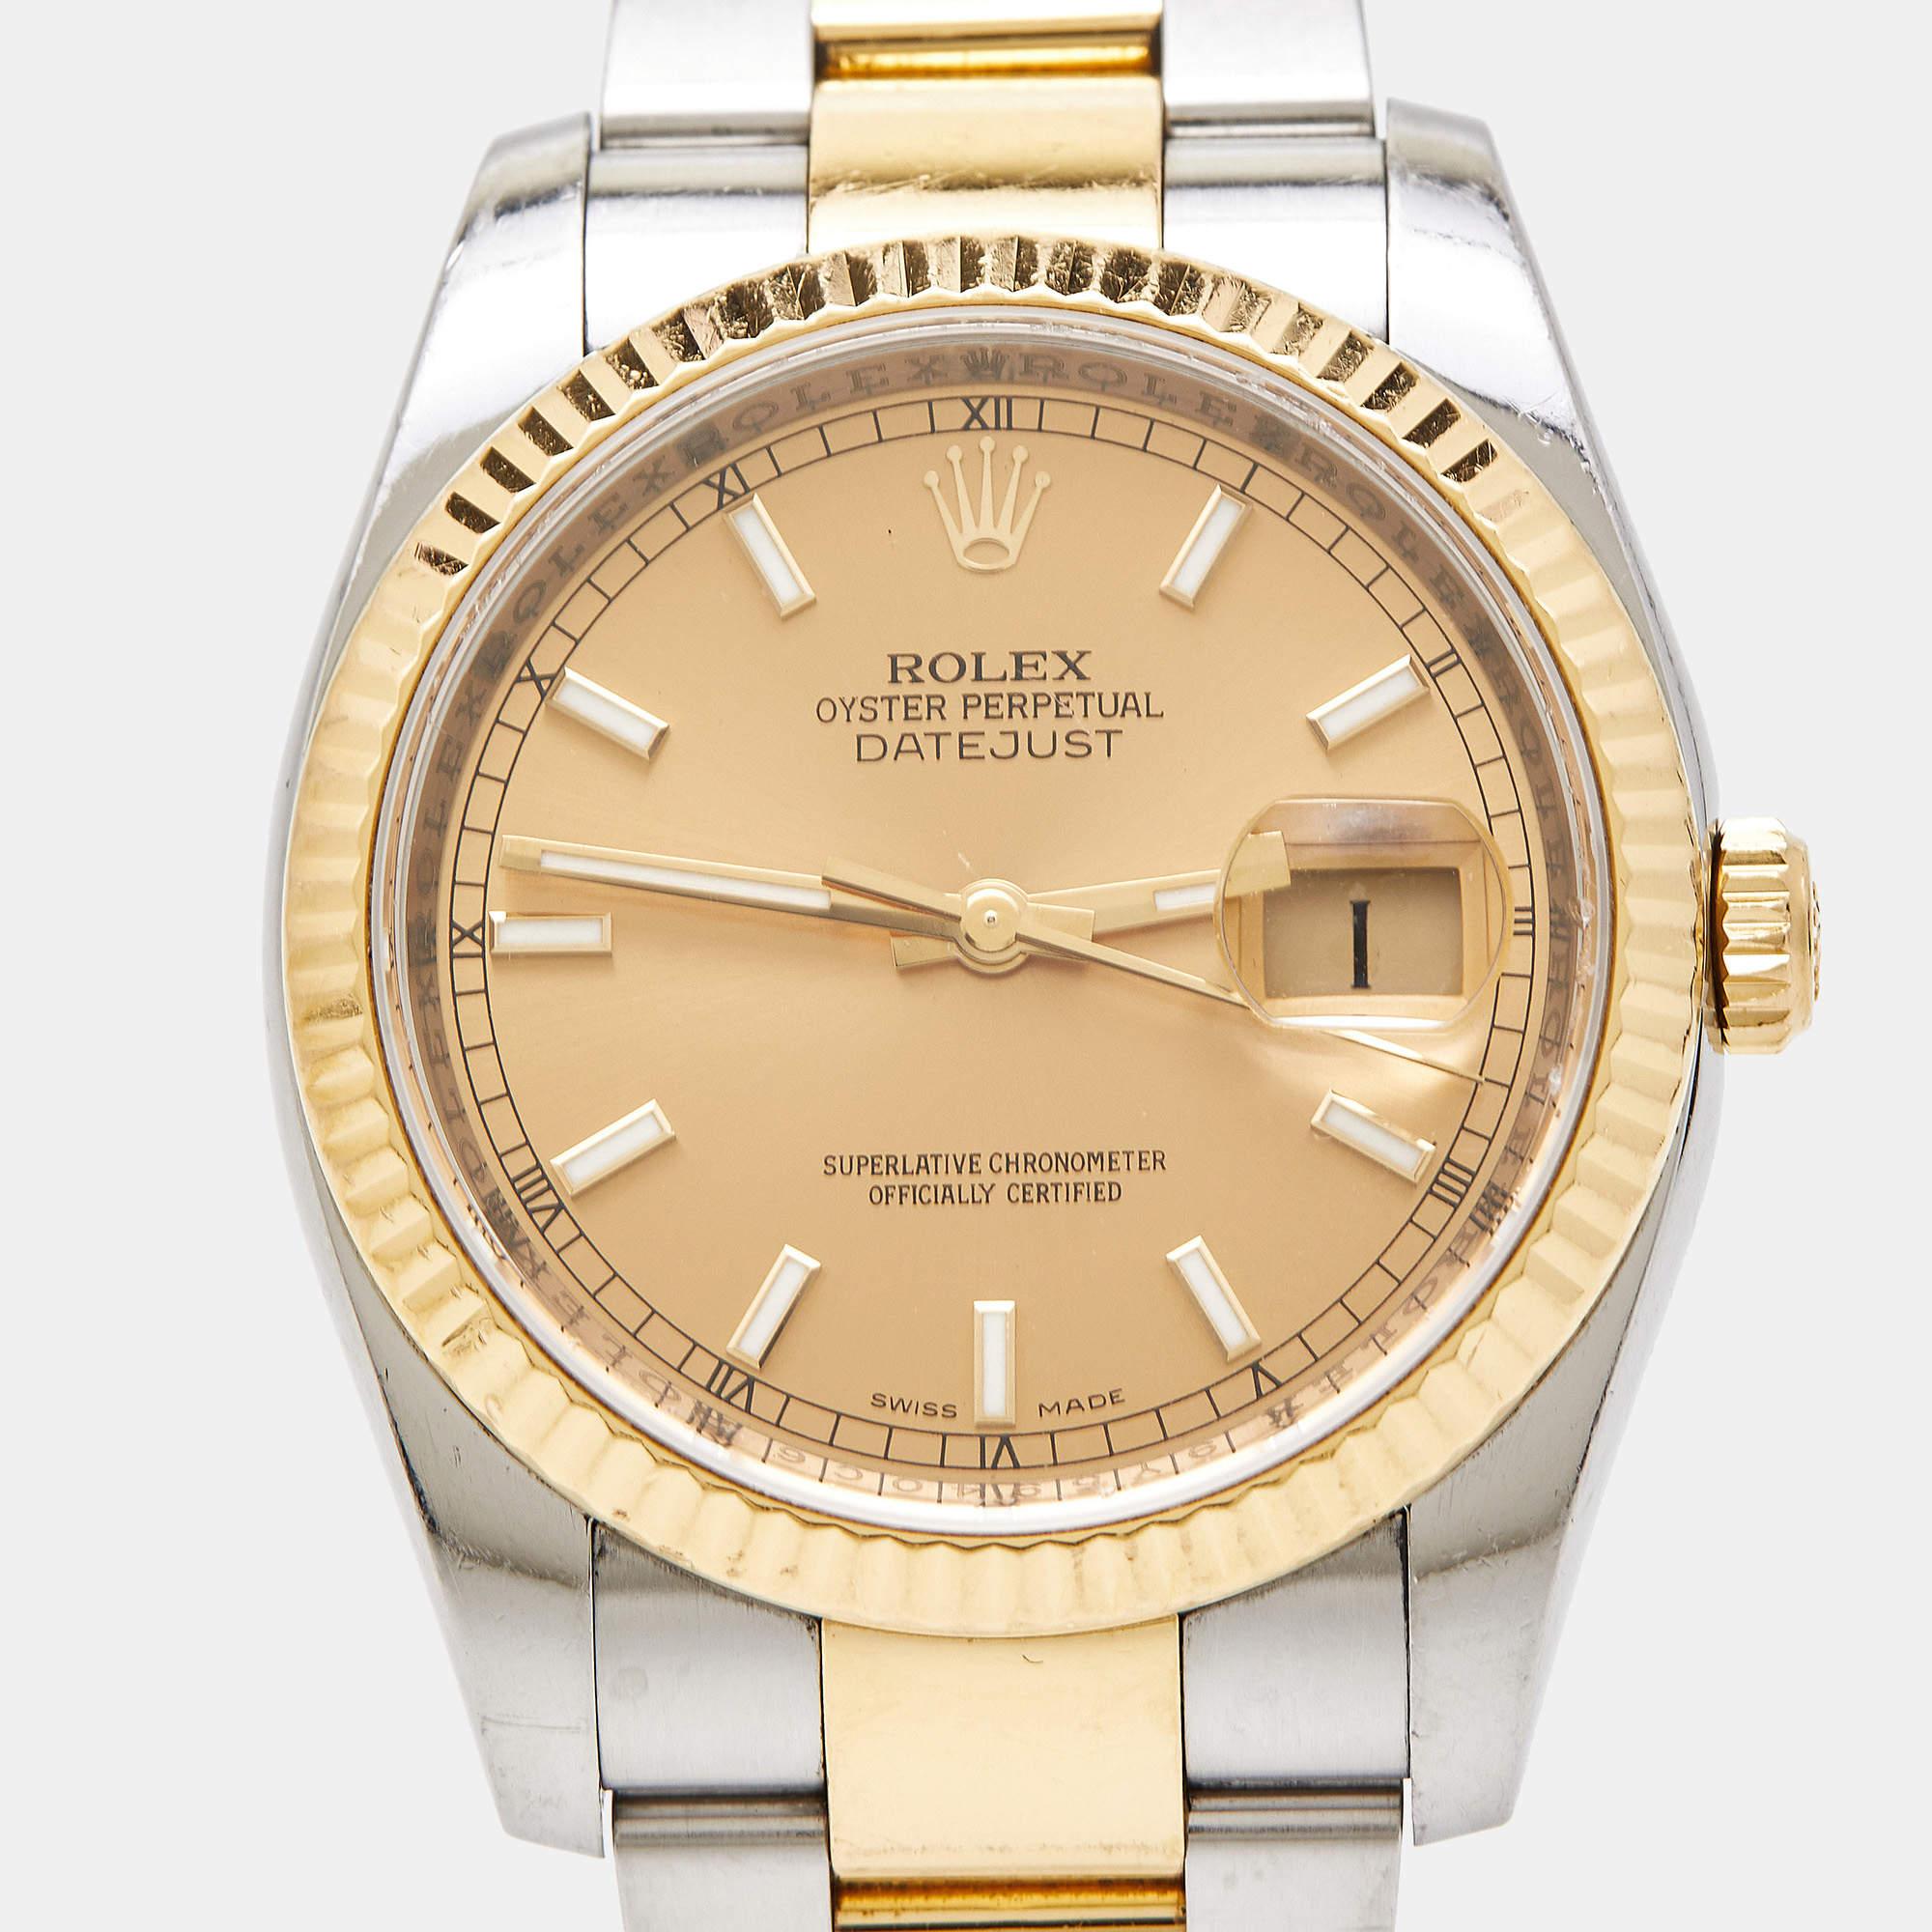 This beautiful Rolex Datejust for women will be a fine investment. Crafted using stainless steel and 18k yellow gold, the automatic watch features a champagne dial set with index hour markers, a date window, and three hands. Iconic, comfortable, and